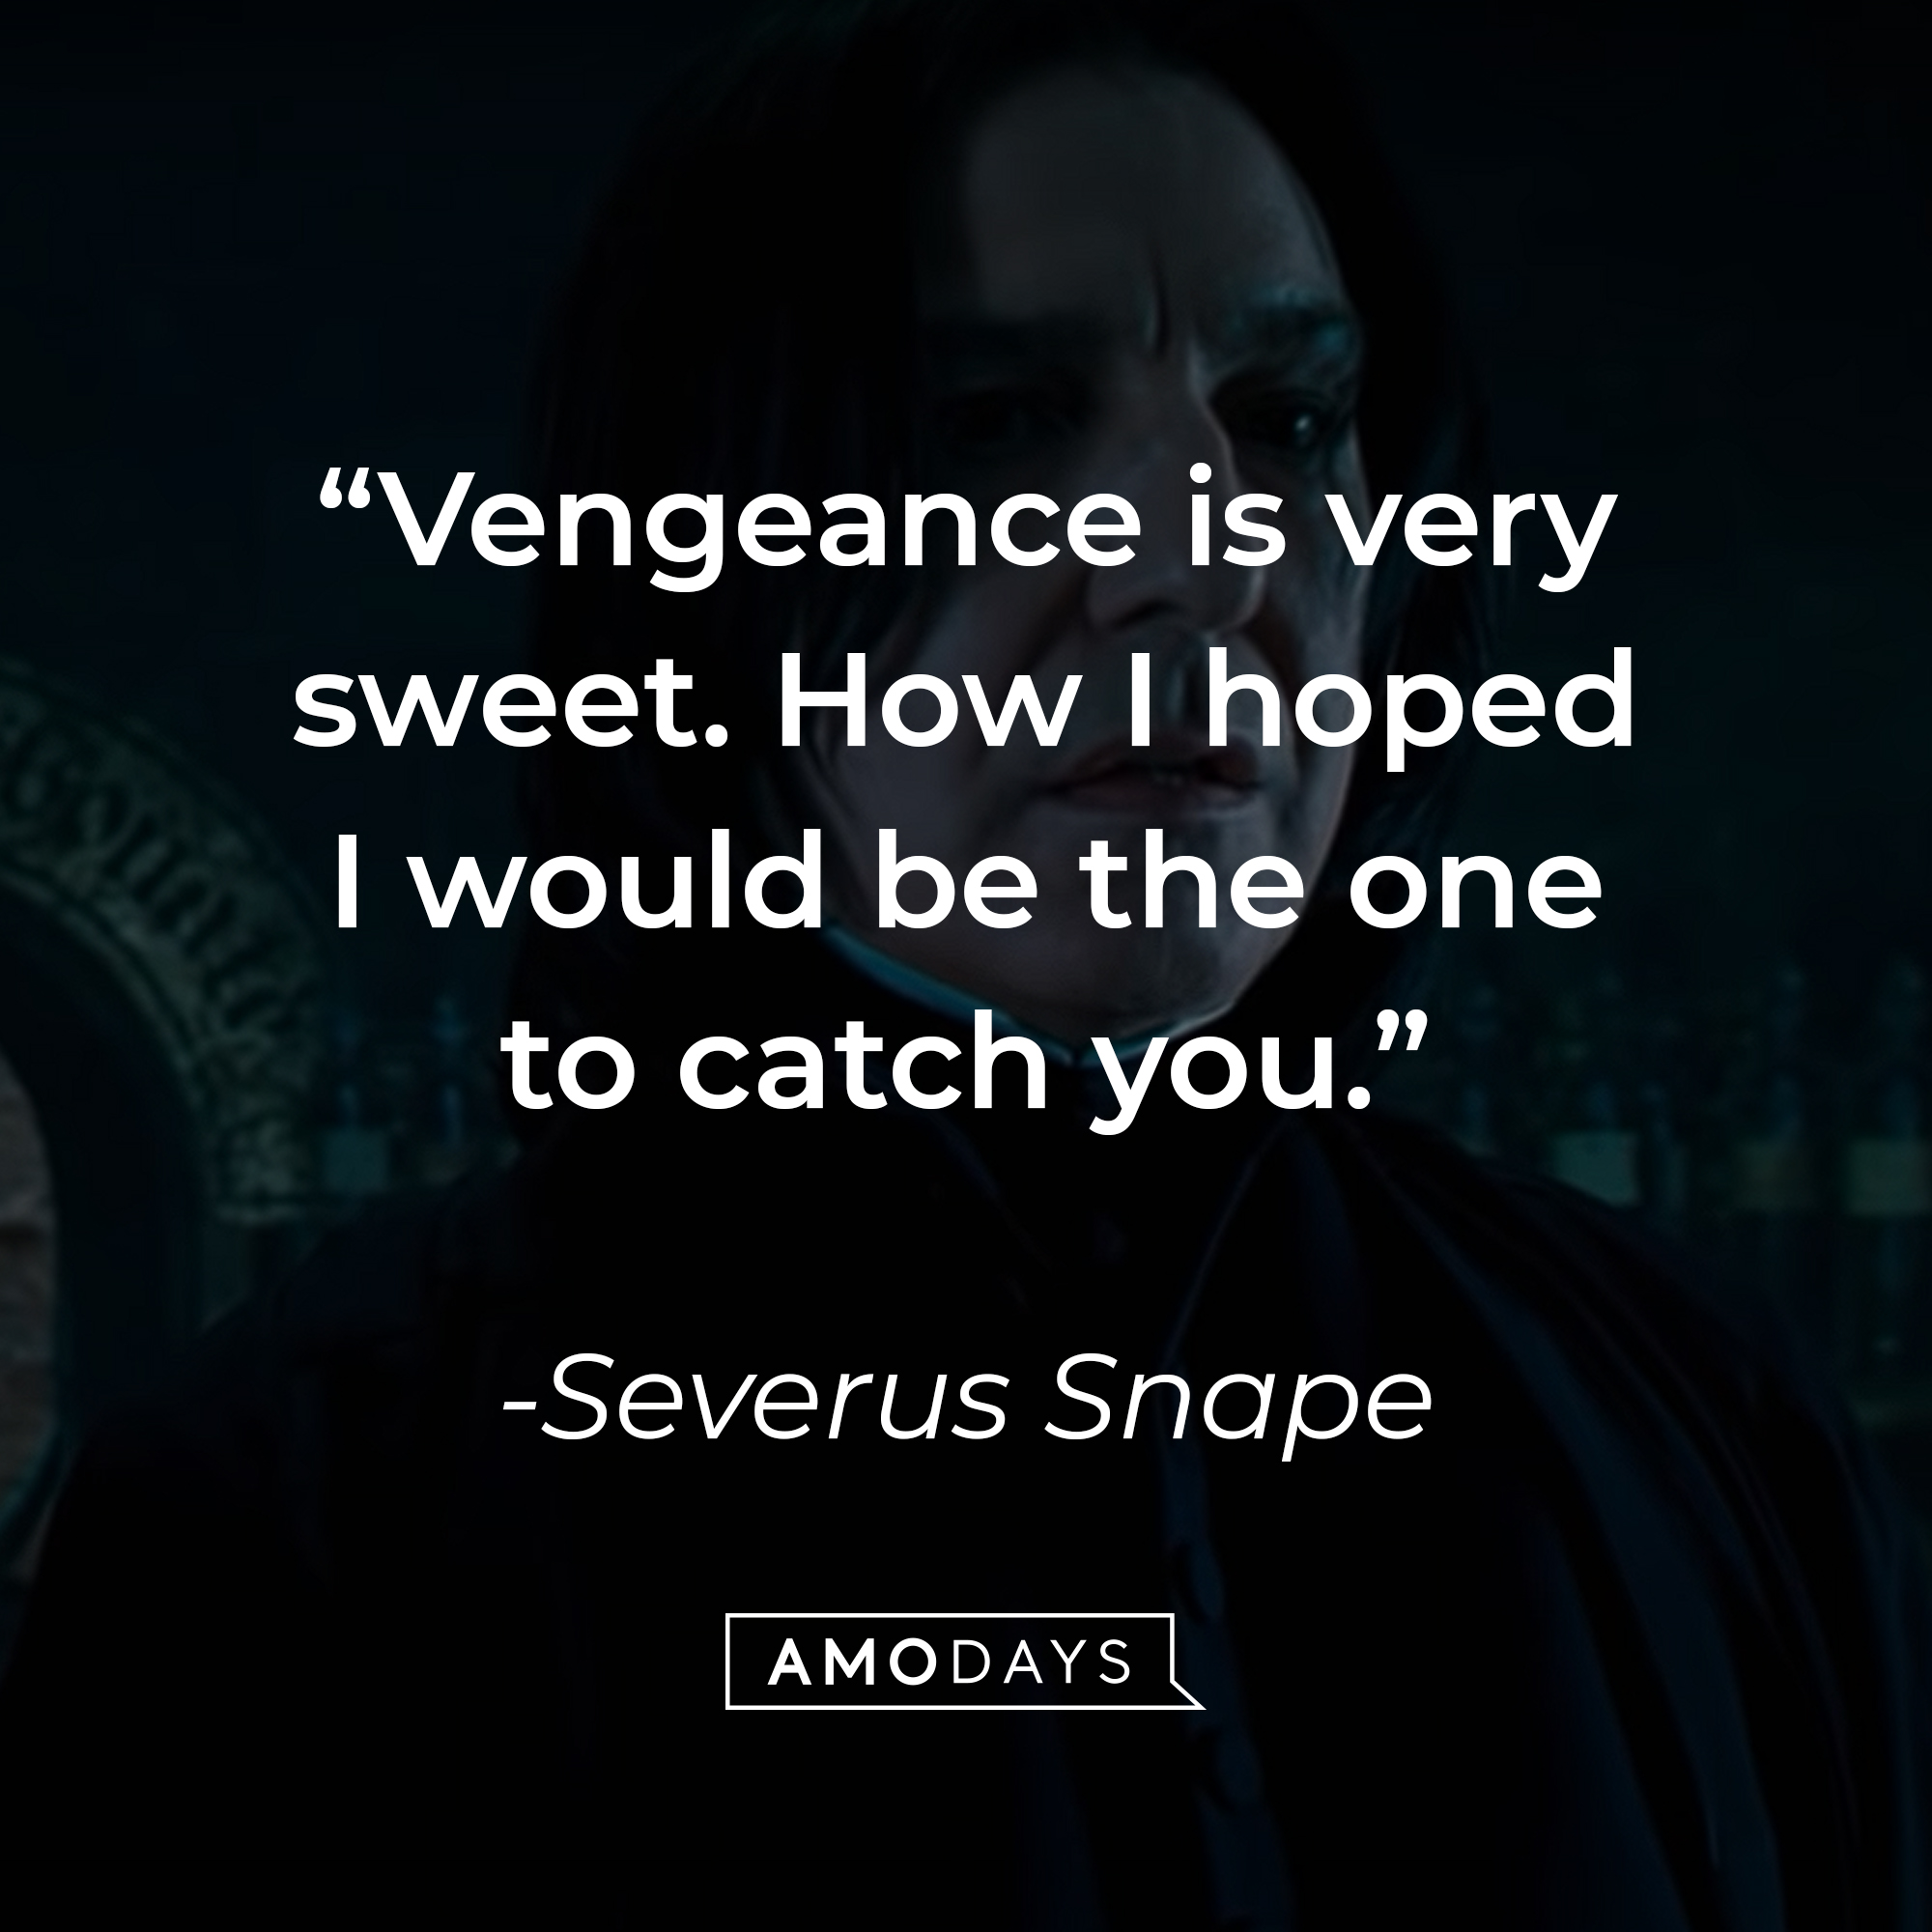 Severus Snape's quote: "Vengeance is very sweet. How I hoped I would be the one to catch you." | Source: YouTube/harrypotter